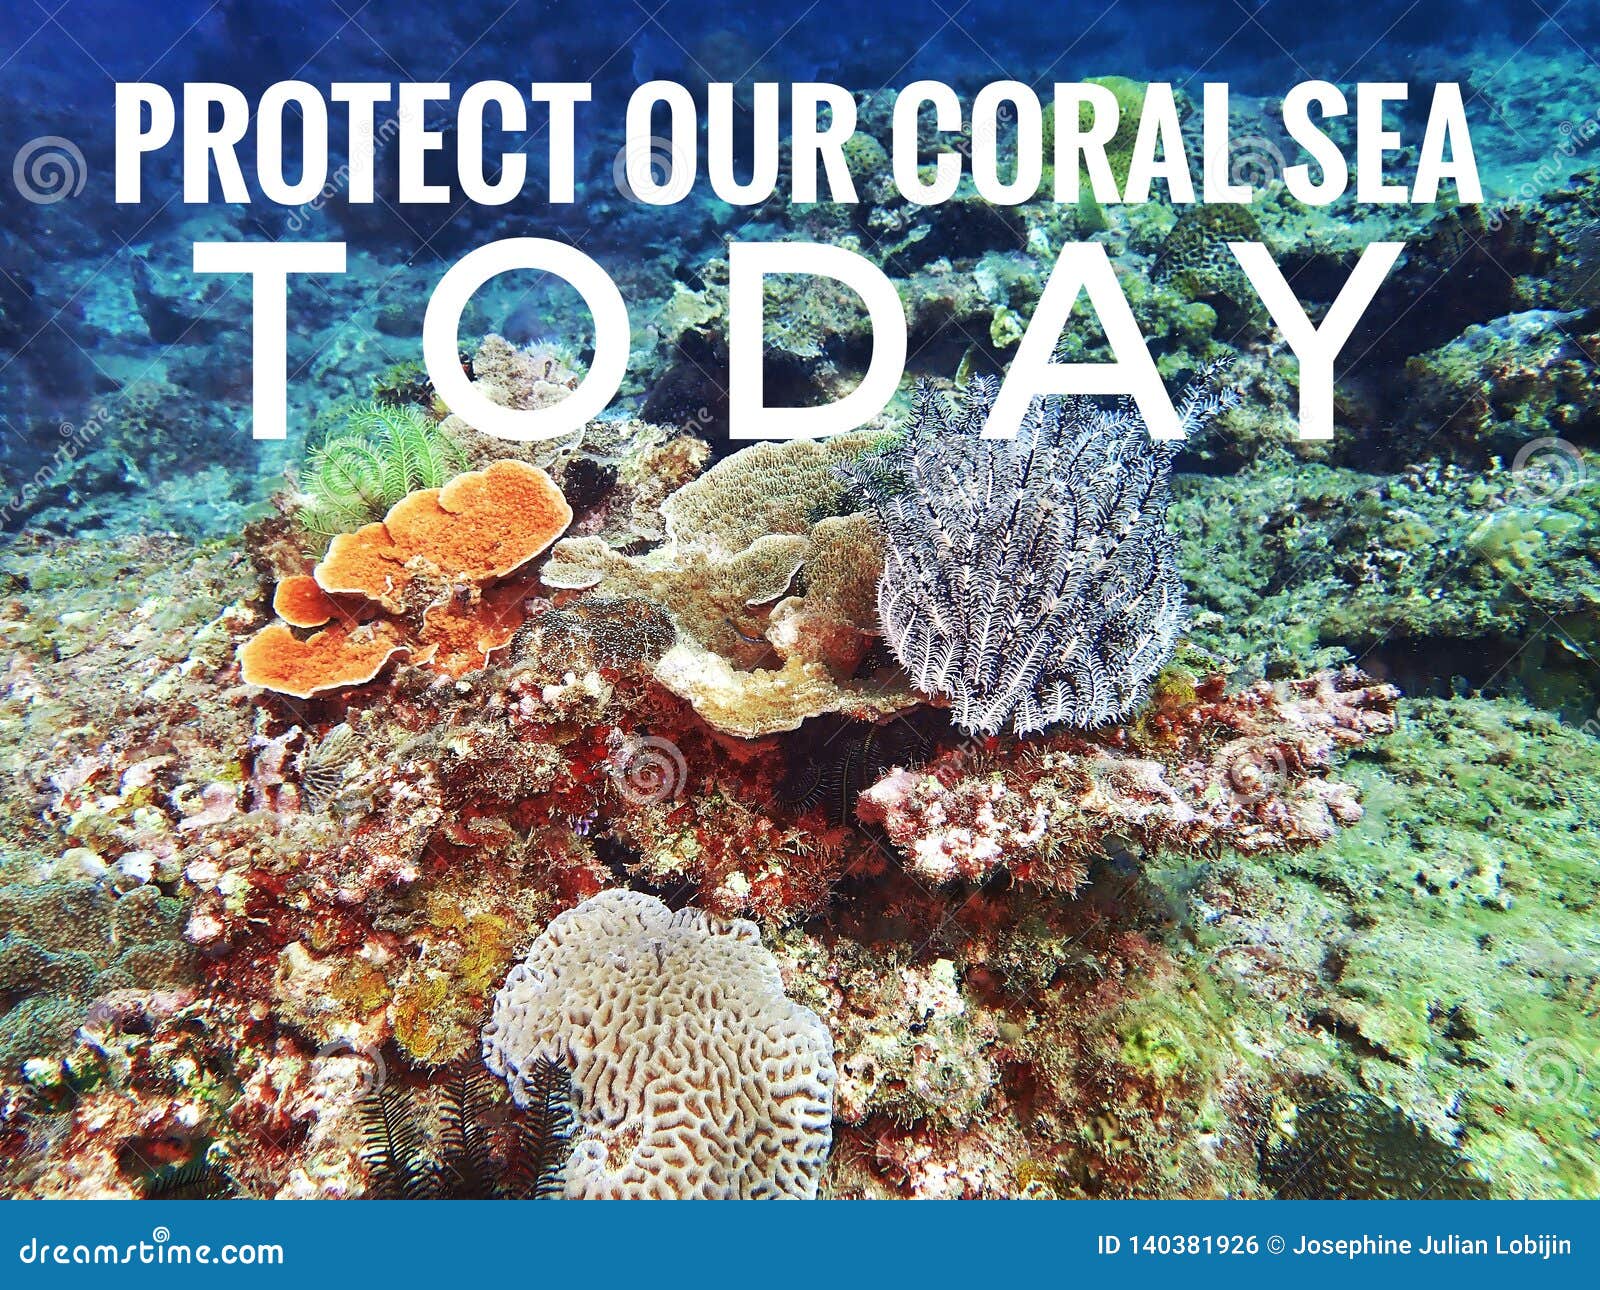 Protect Our Coral Reefs Today Design for Awareness the Importance of ...